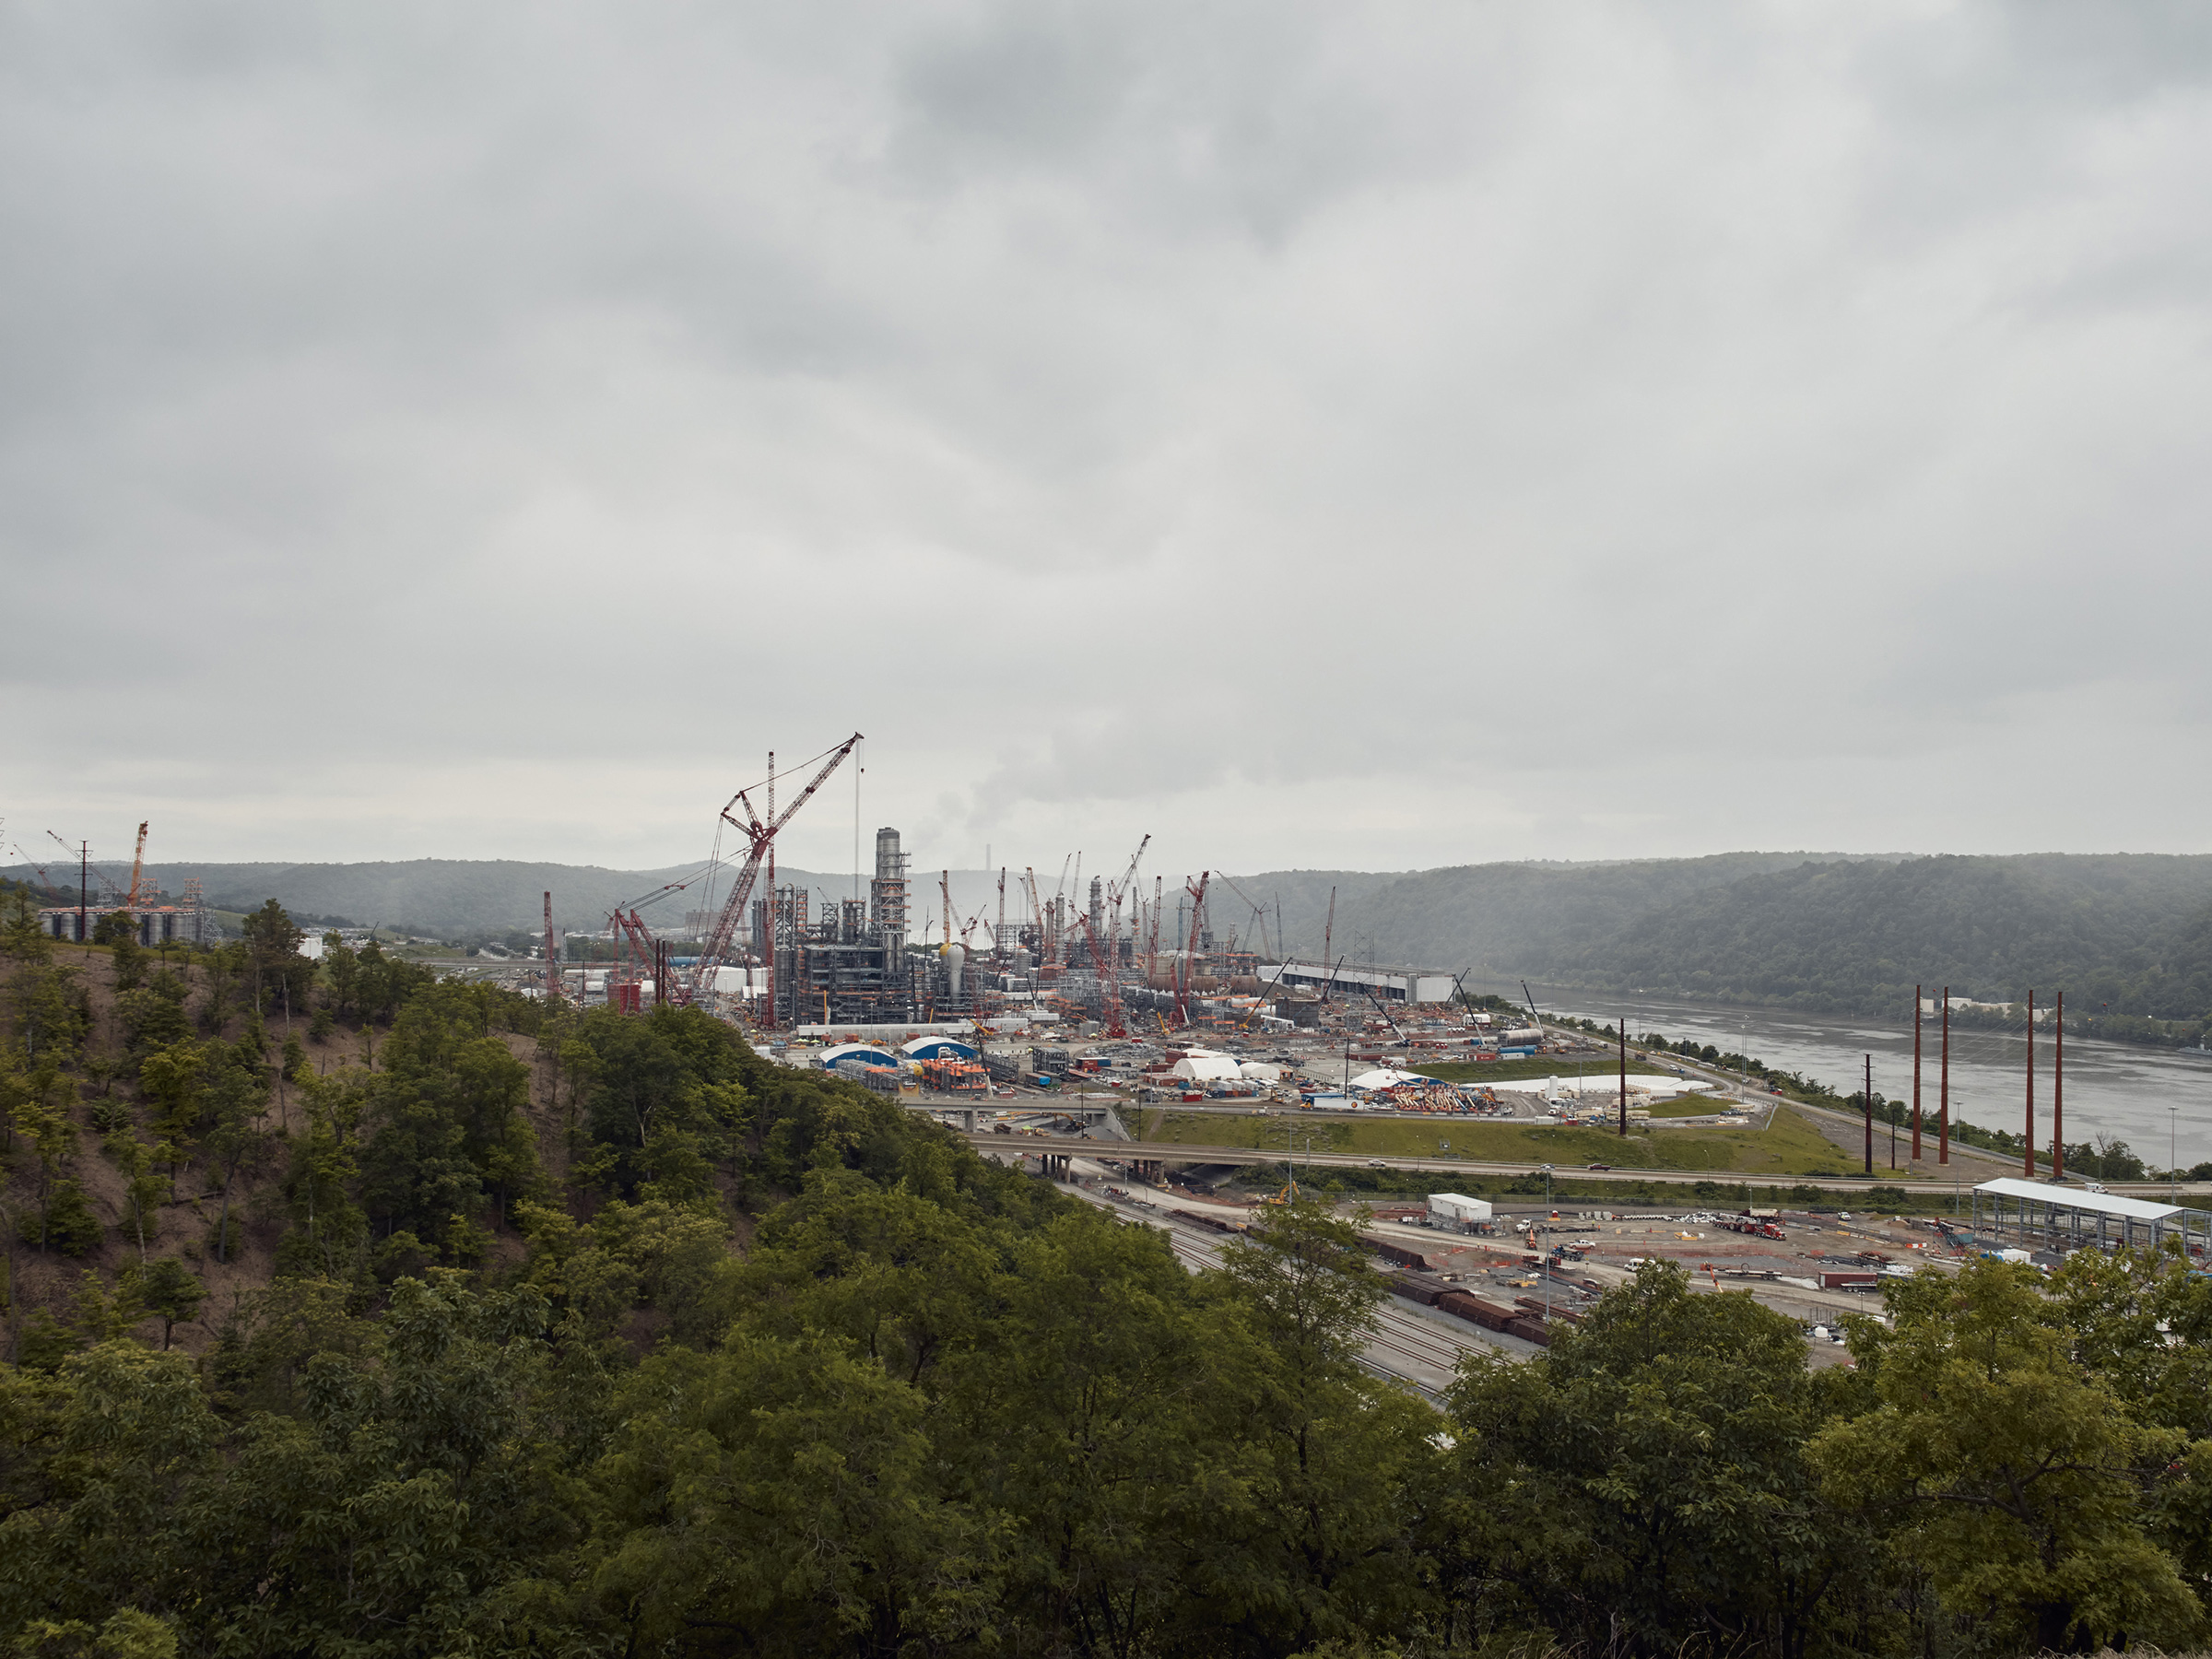 A $6 billion Shell plastics facility is currently under construction outside of Pittsburgh